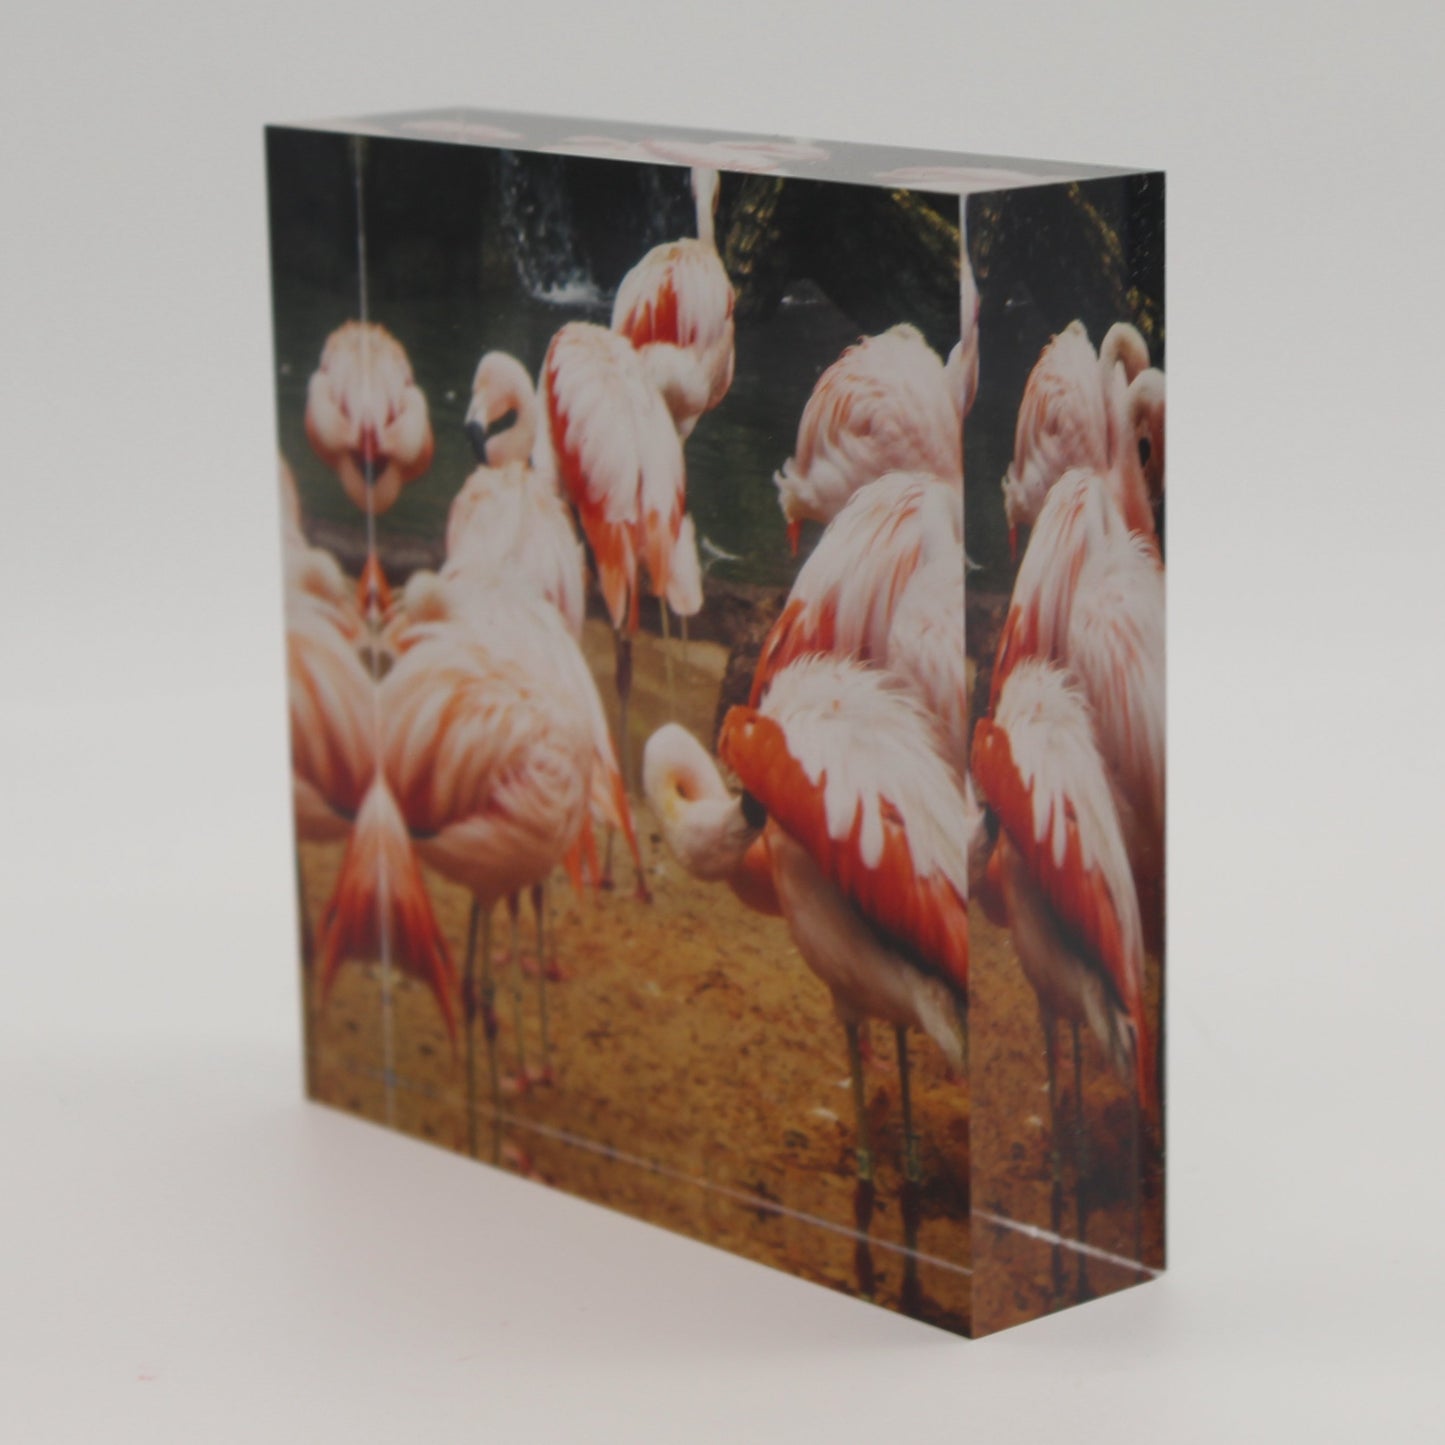 Tilted view of acrylic block picture of pink flamingoes on a sandy beach